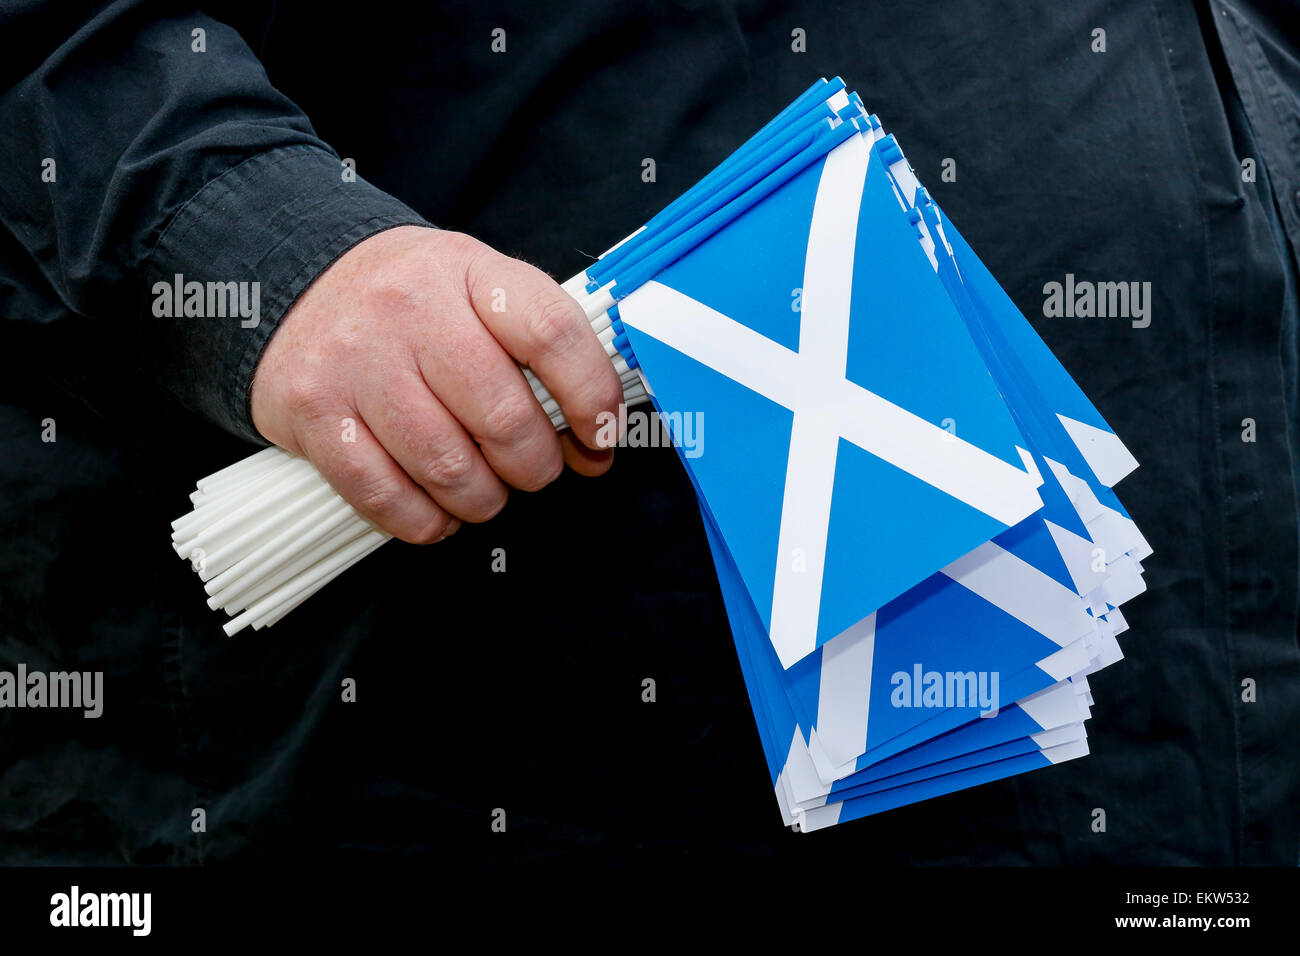 Man holding a number of small plastic saltire flags, Scotland Stock Photo